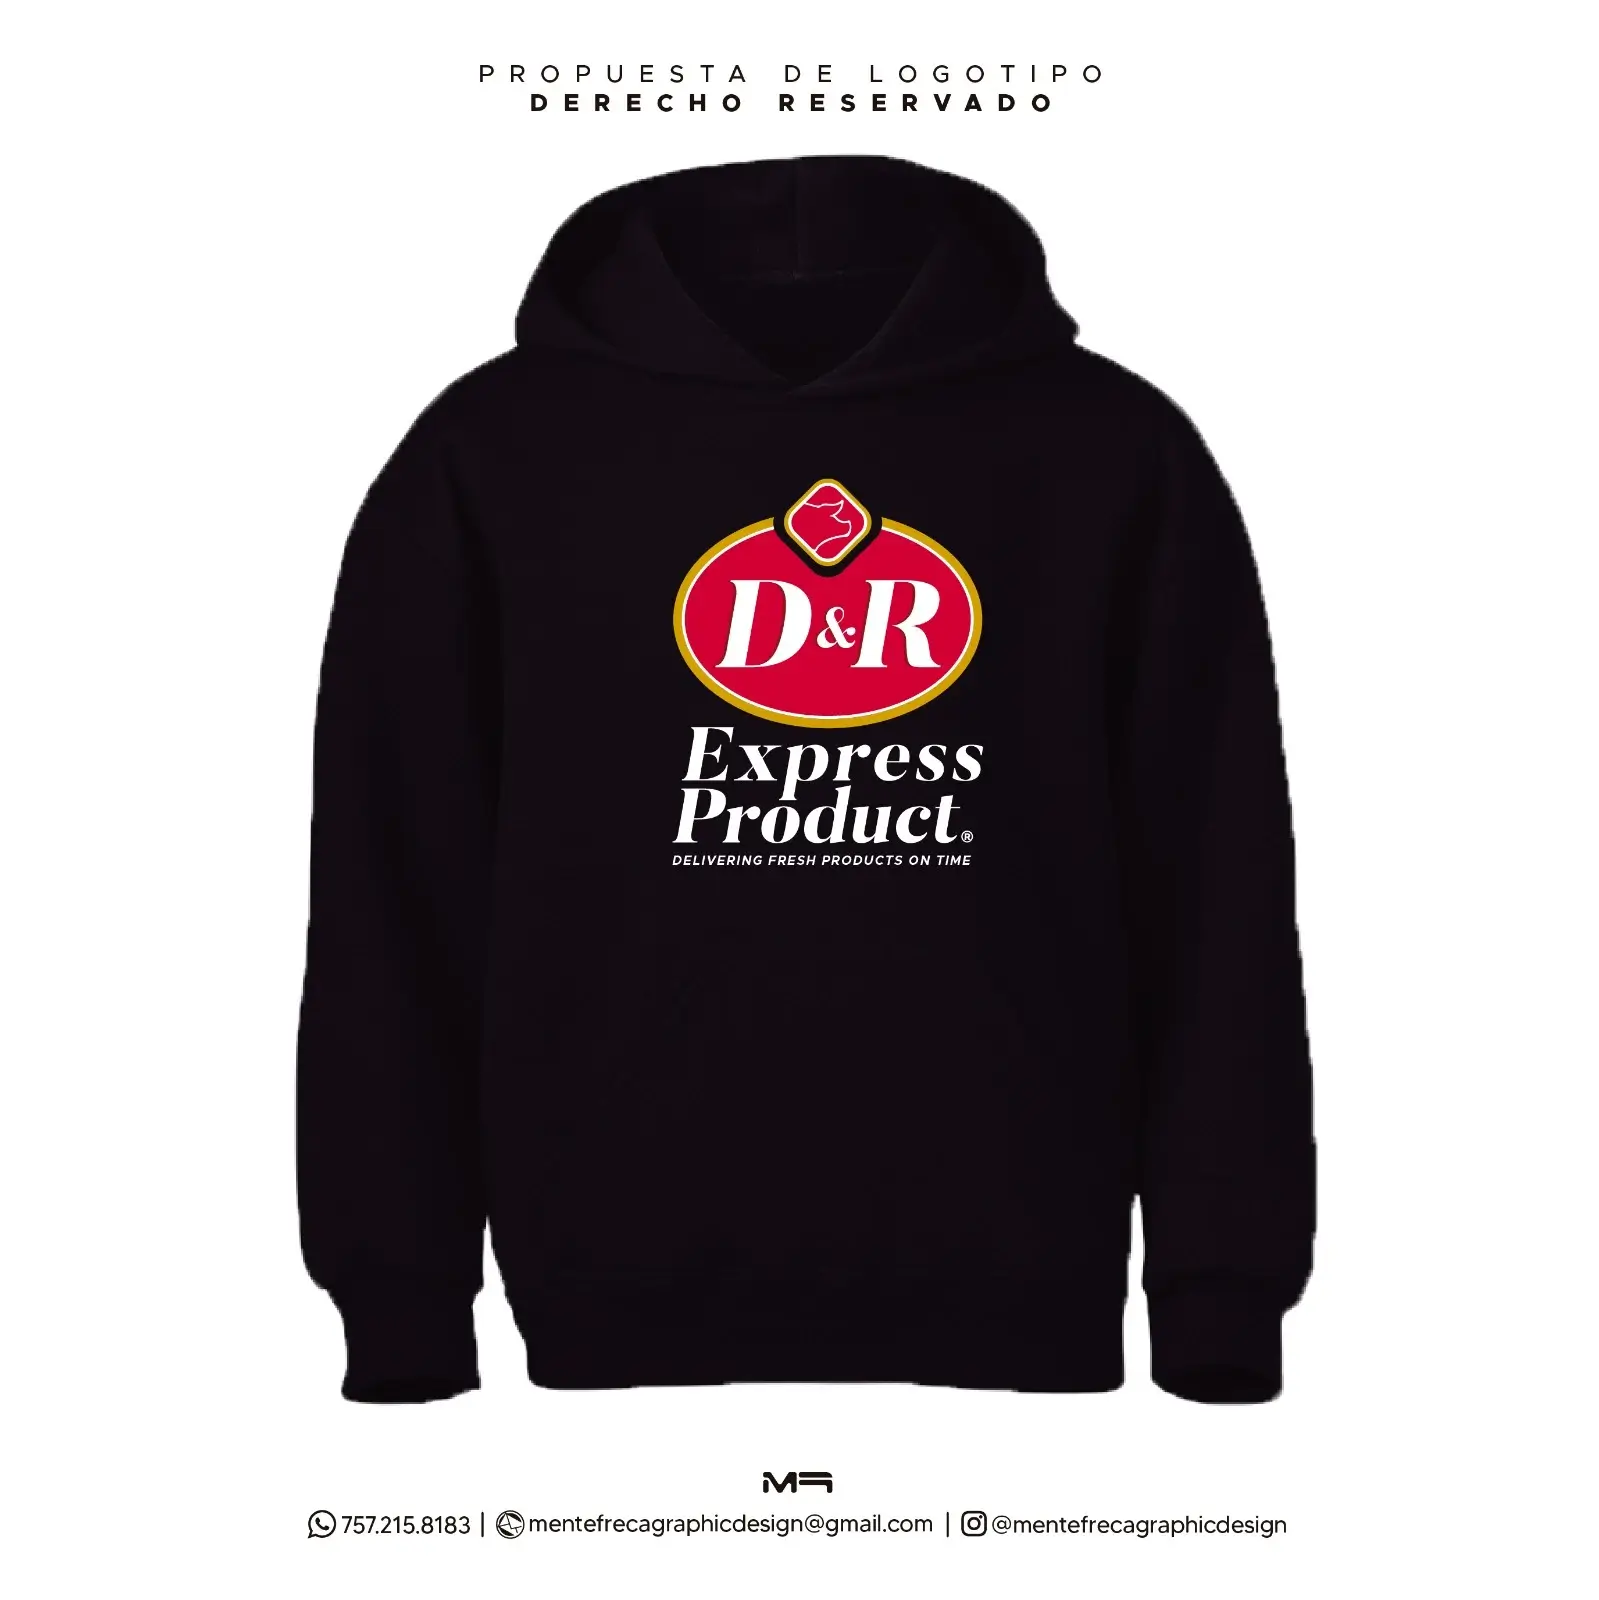 D&R Express Product Hoodie